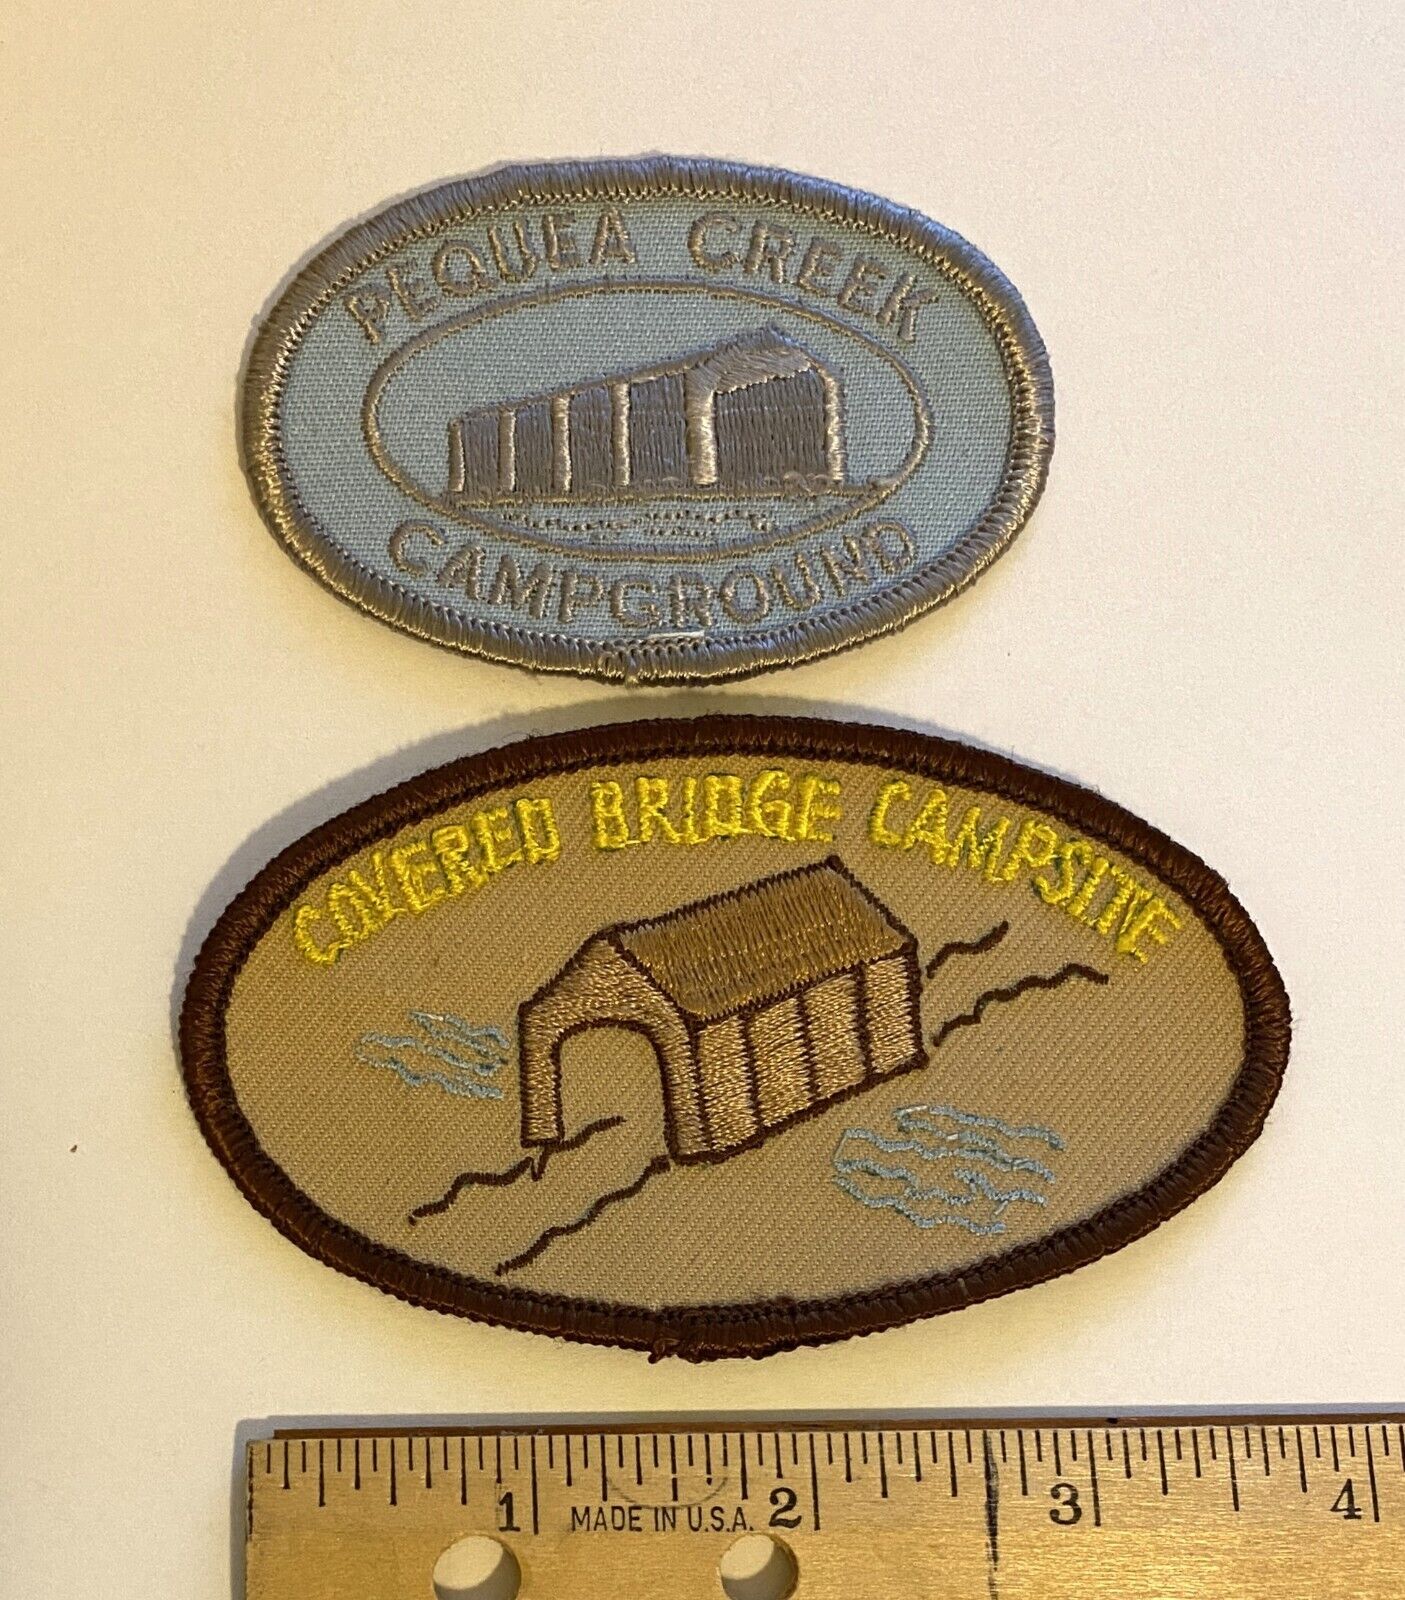 Two Covered Bridge Campsite Campground Patches